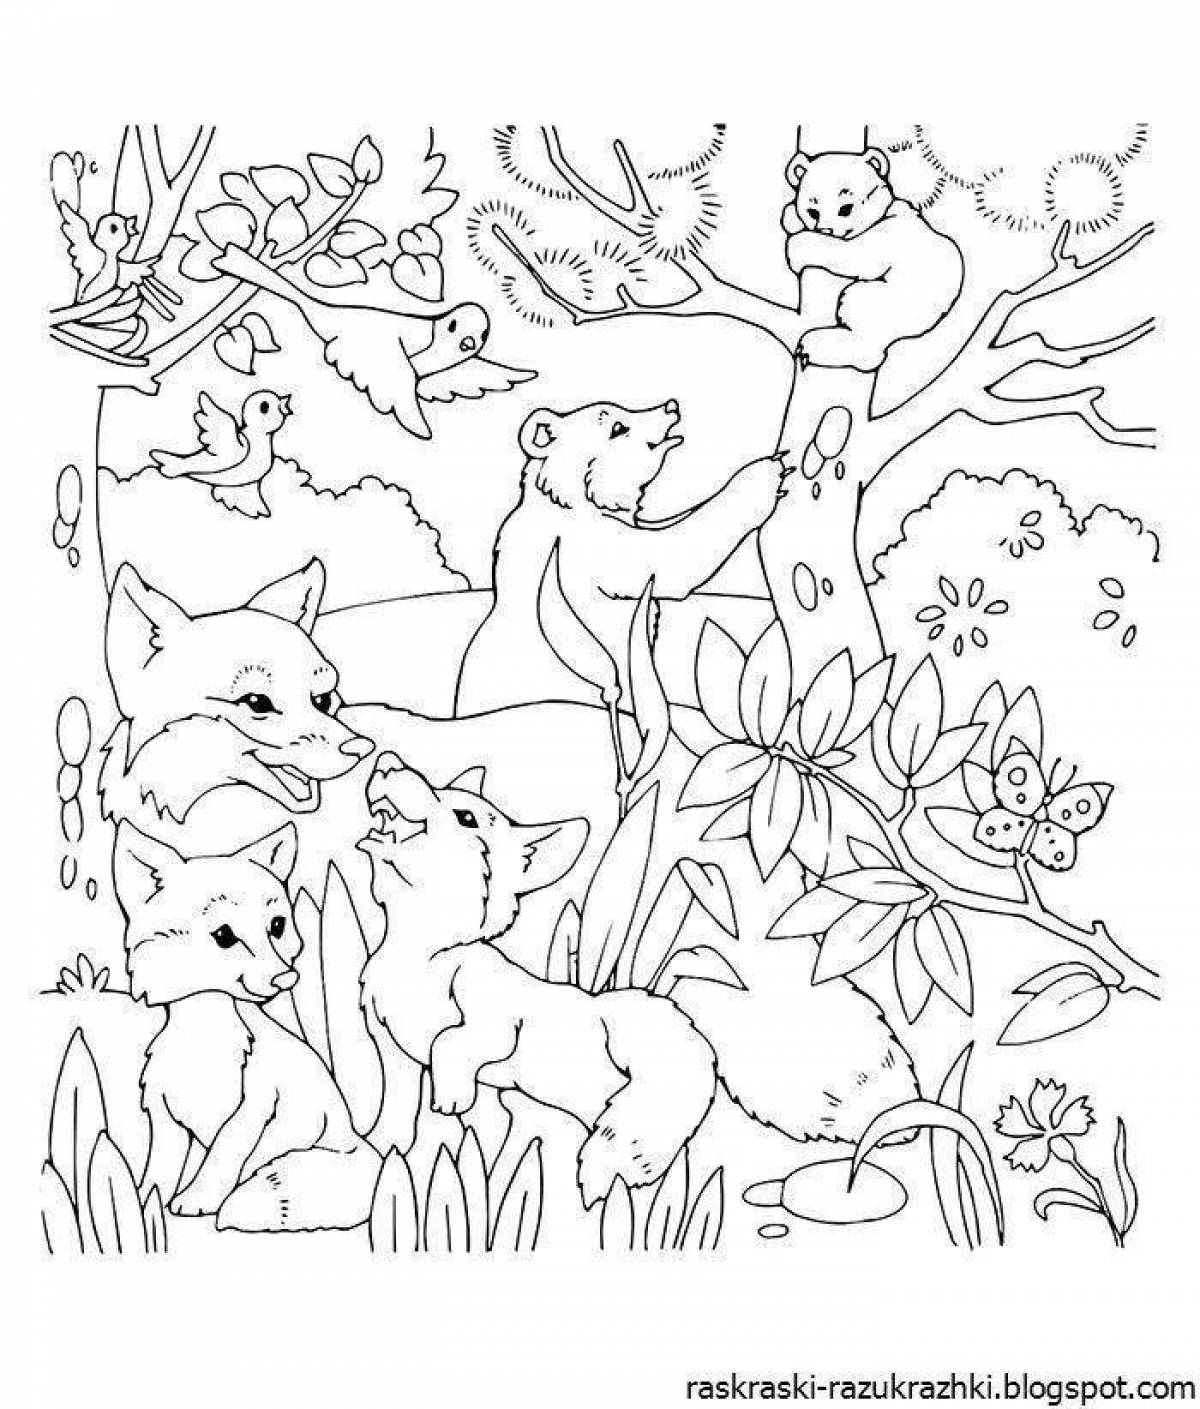 Coloring animals in the forest